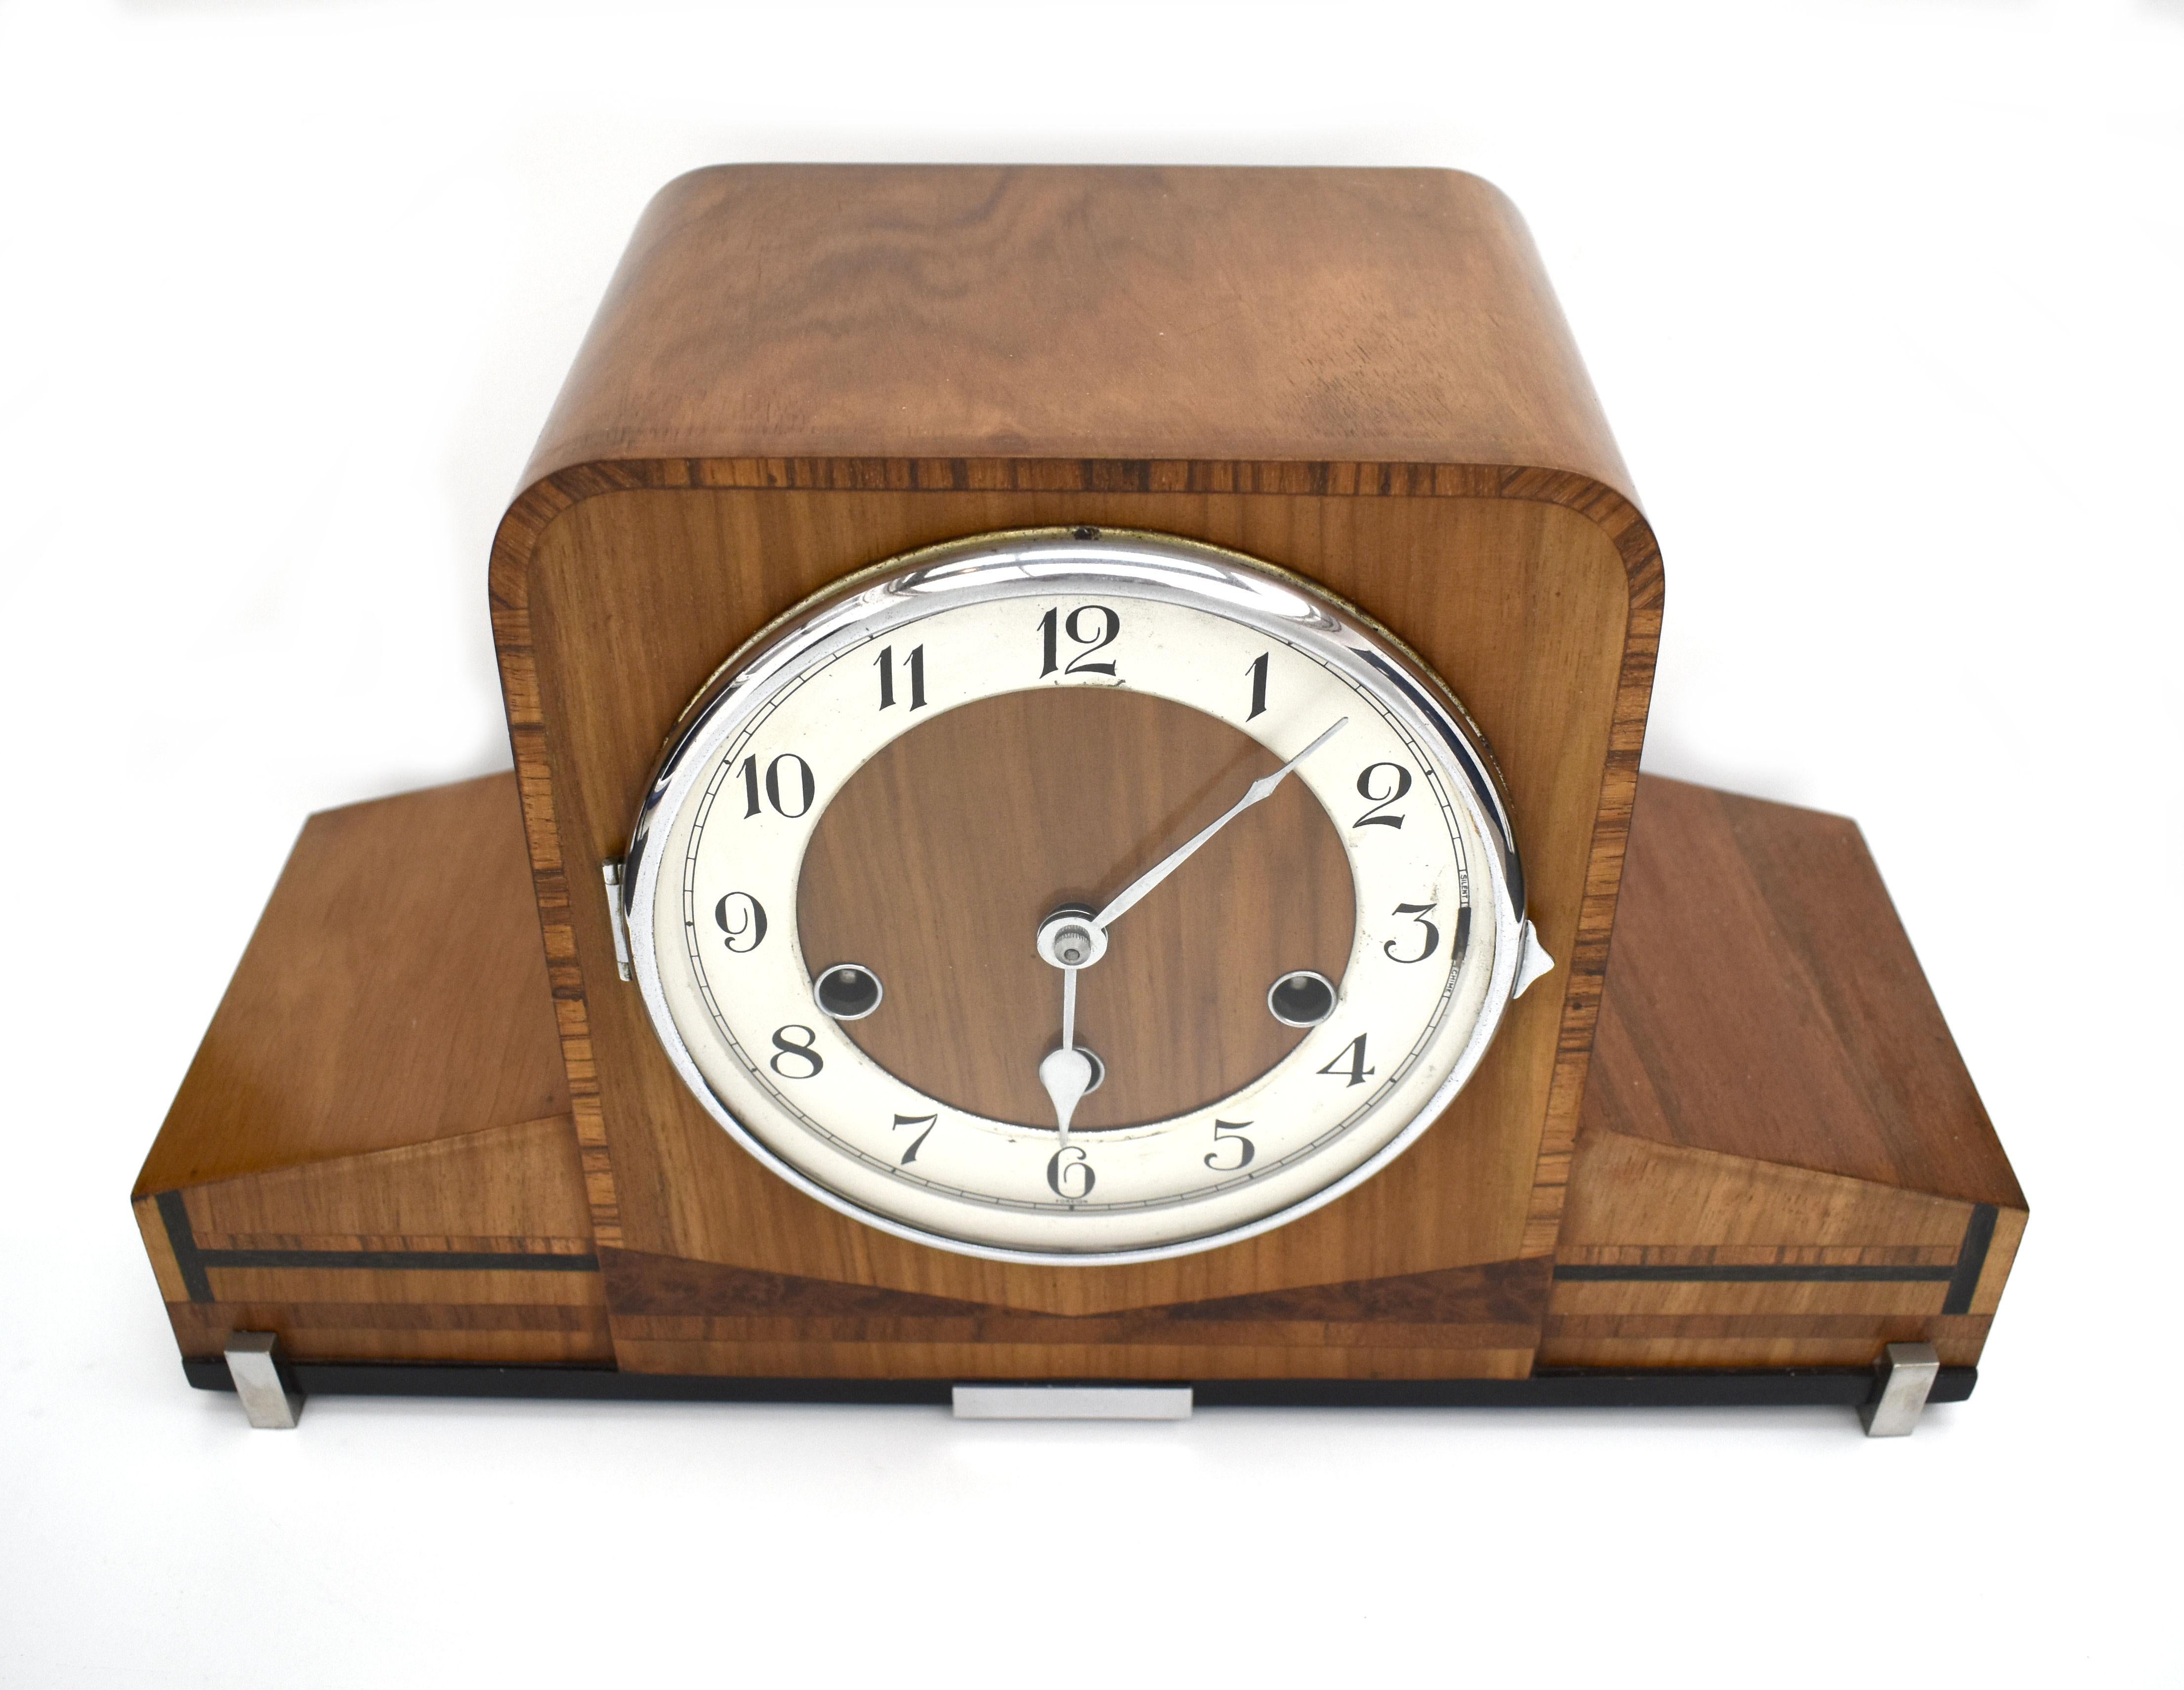 A magnificent and original Art Deco mantle clock for your consideration, Circa 1930. Stunning profile, having a high squared centre and slender, tapered wings. Reminiscent of the golden age of flight. Attractive inlay, using ebony, fruitwoods and